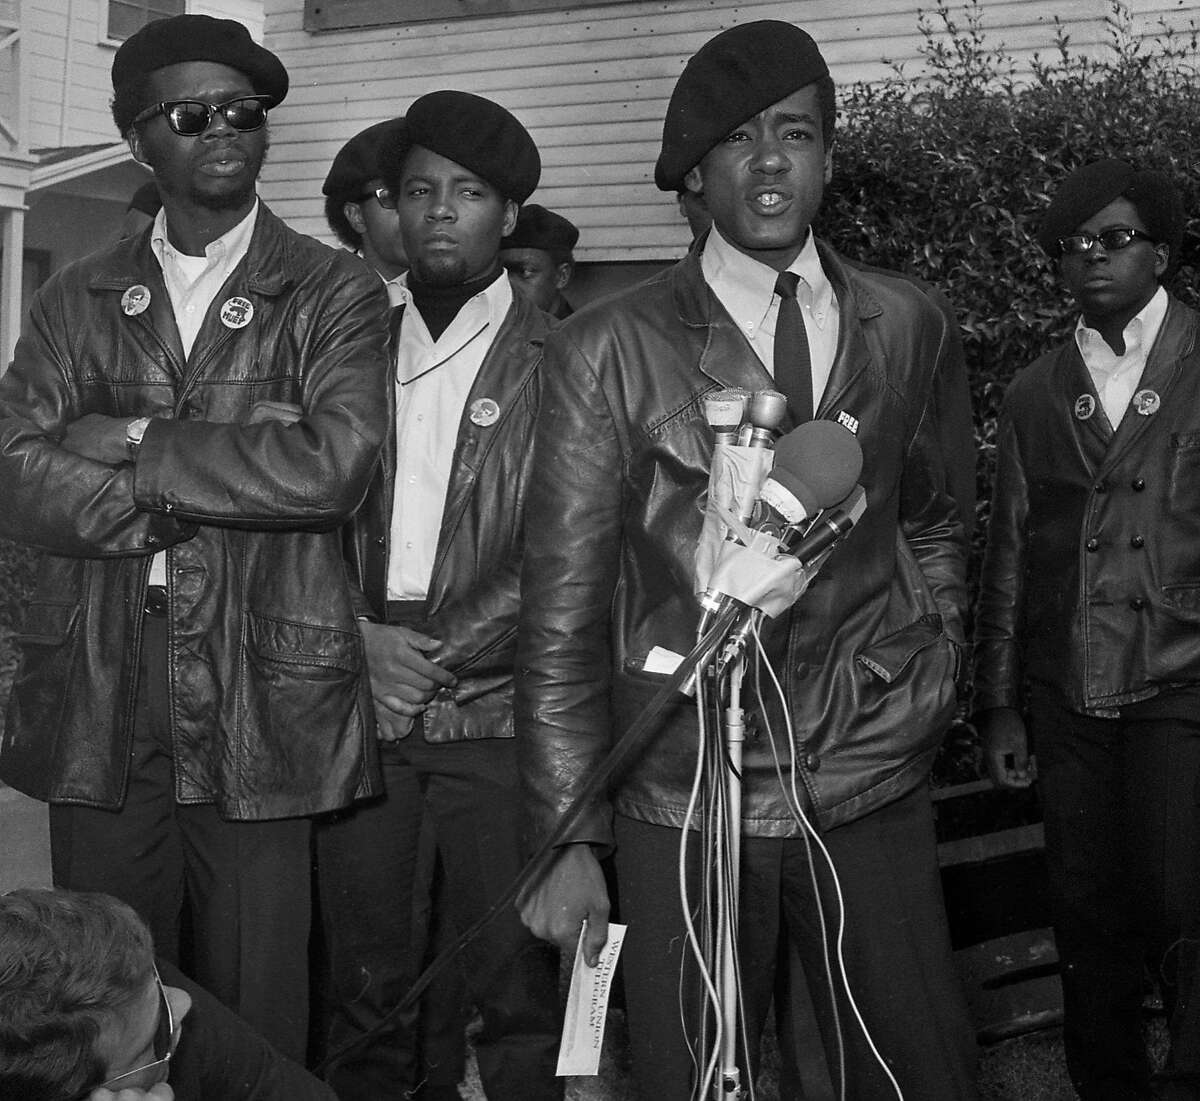 The funeral of Black Panther Bobby Hutton 04/17/1968